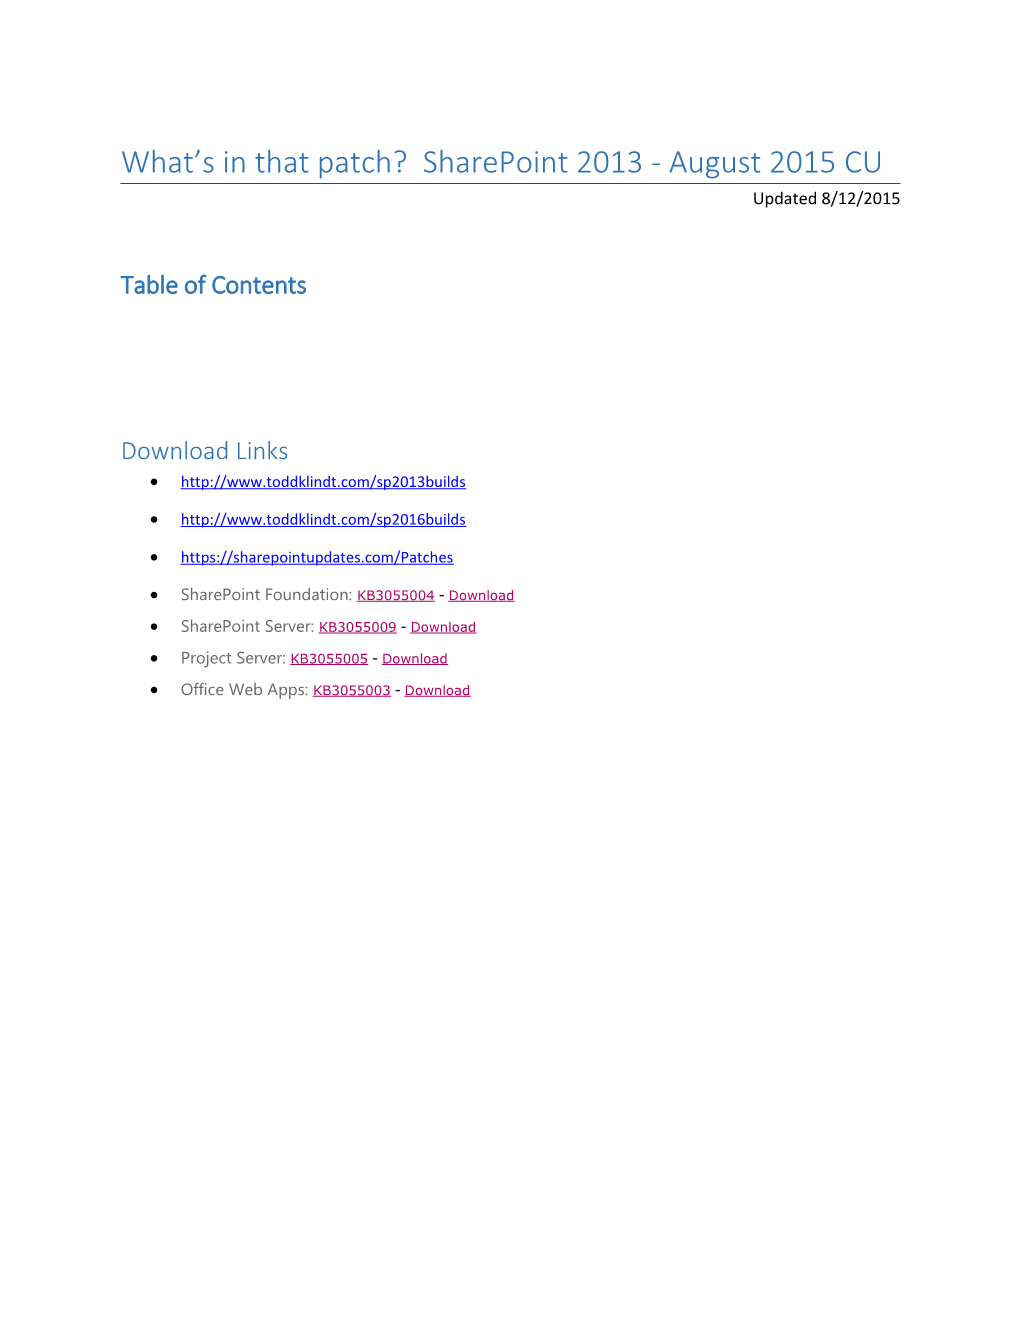 What S in That Patch? Sharepoint 2013 - August 2015 CU